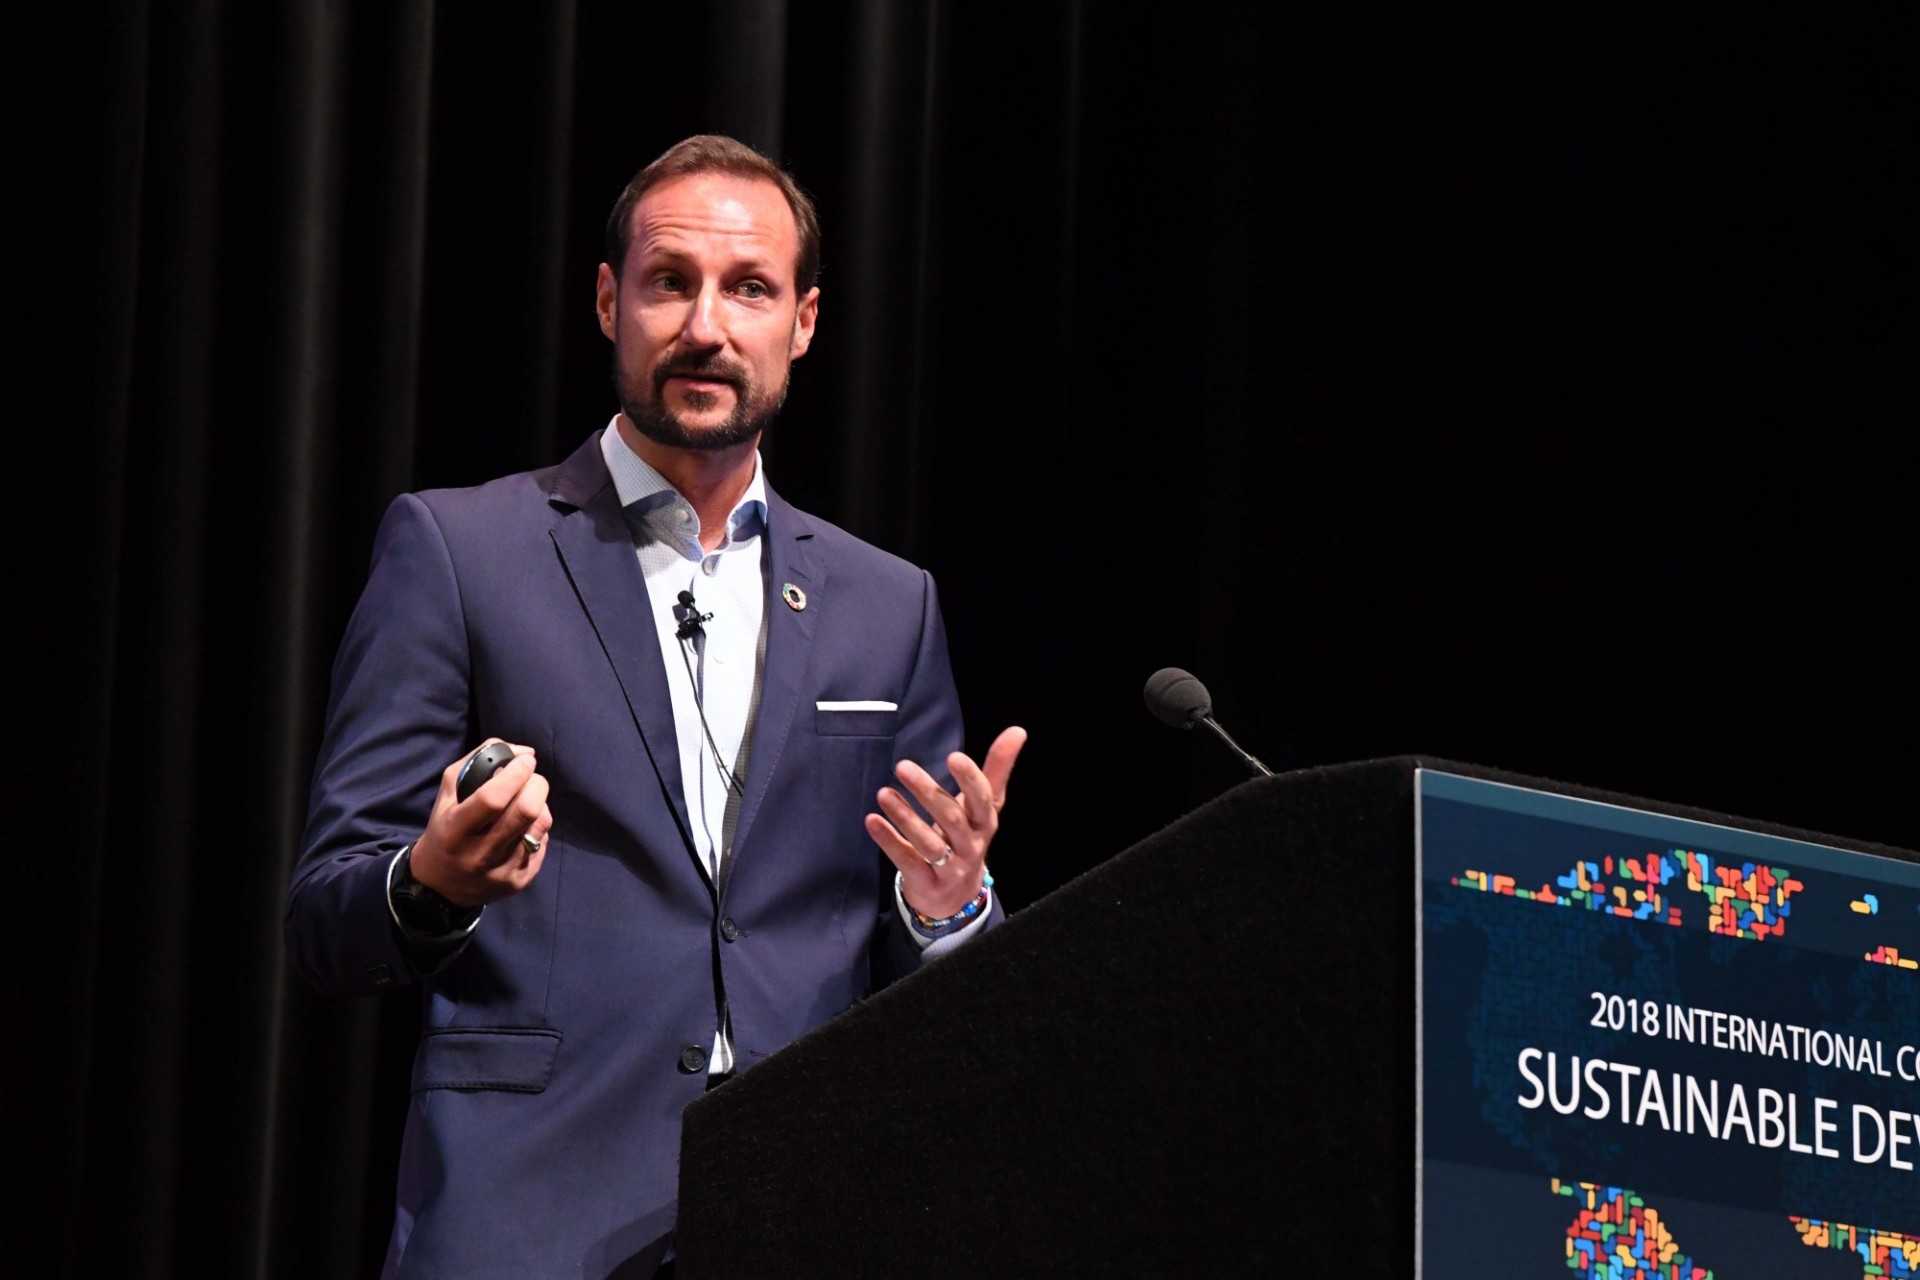 His Royal Highness Crown Prince Haakon of Norway, delivers his address to Columbia University students, faculty and staff.